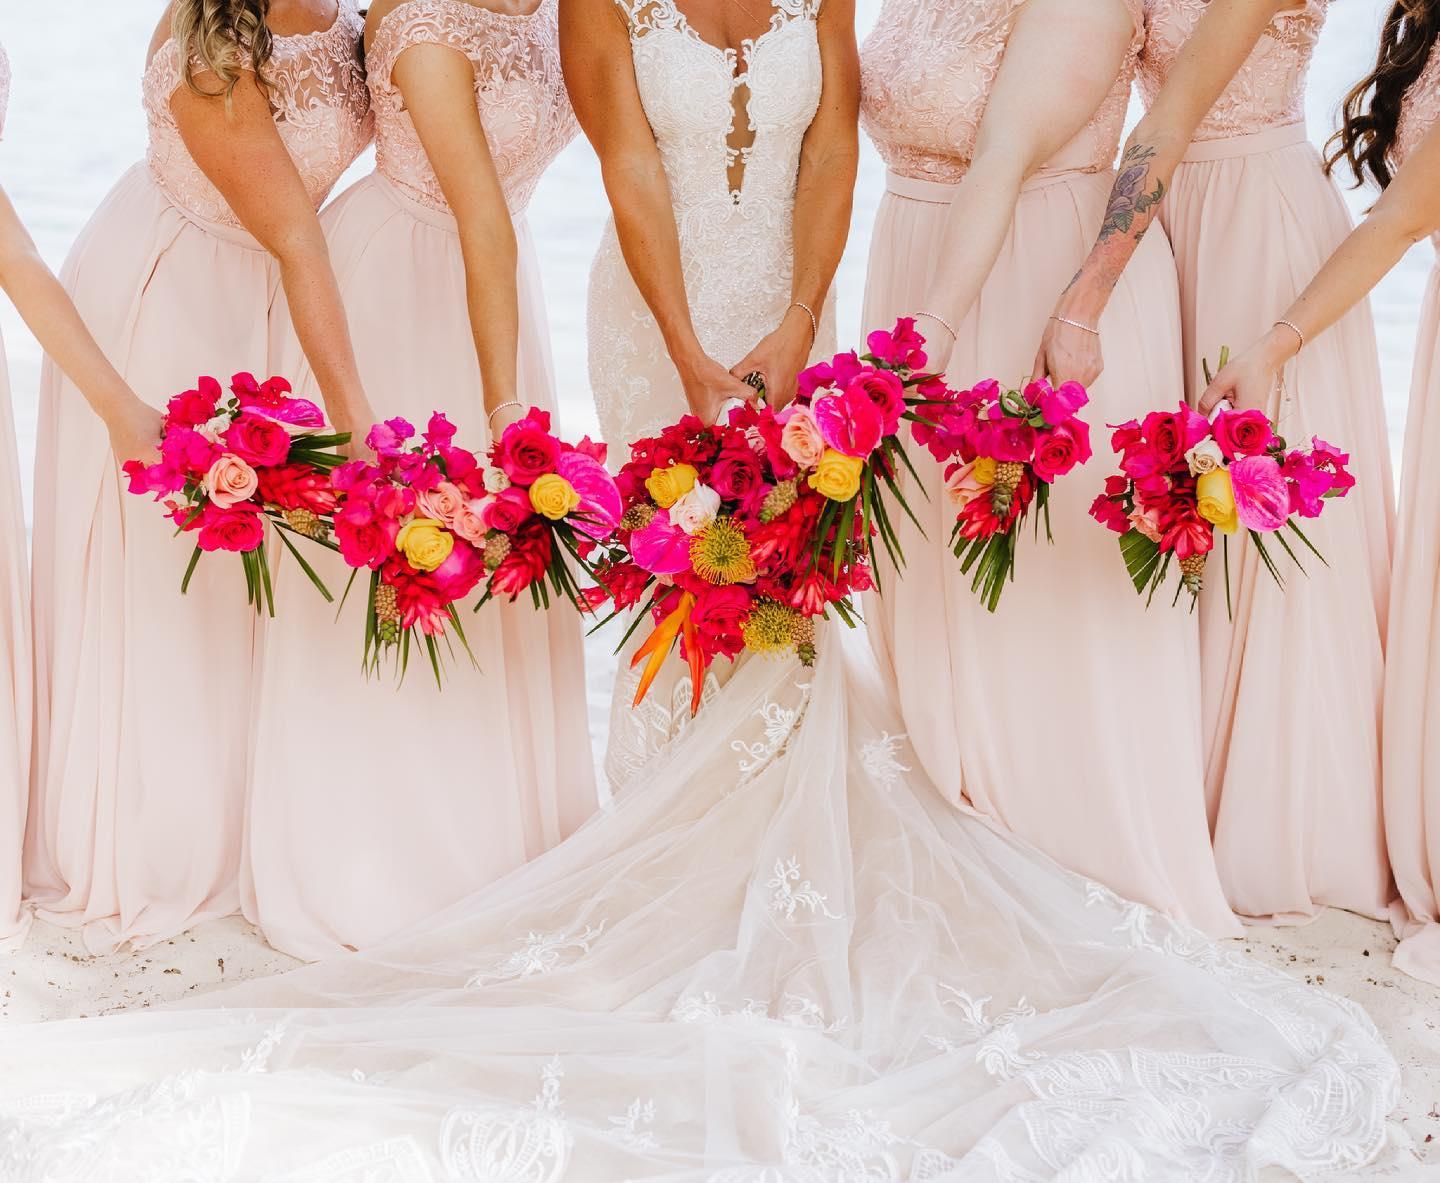 Colorful Flower Bunches in the Bride Party Hands